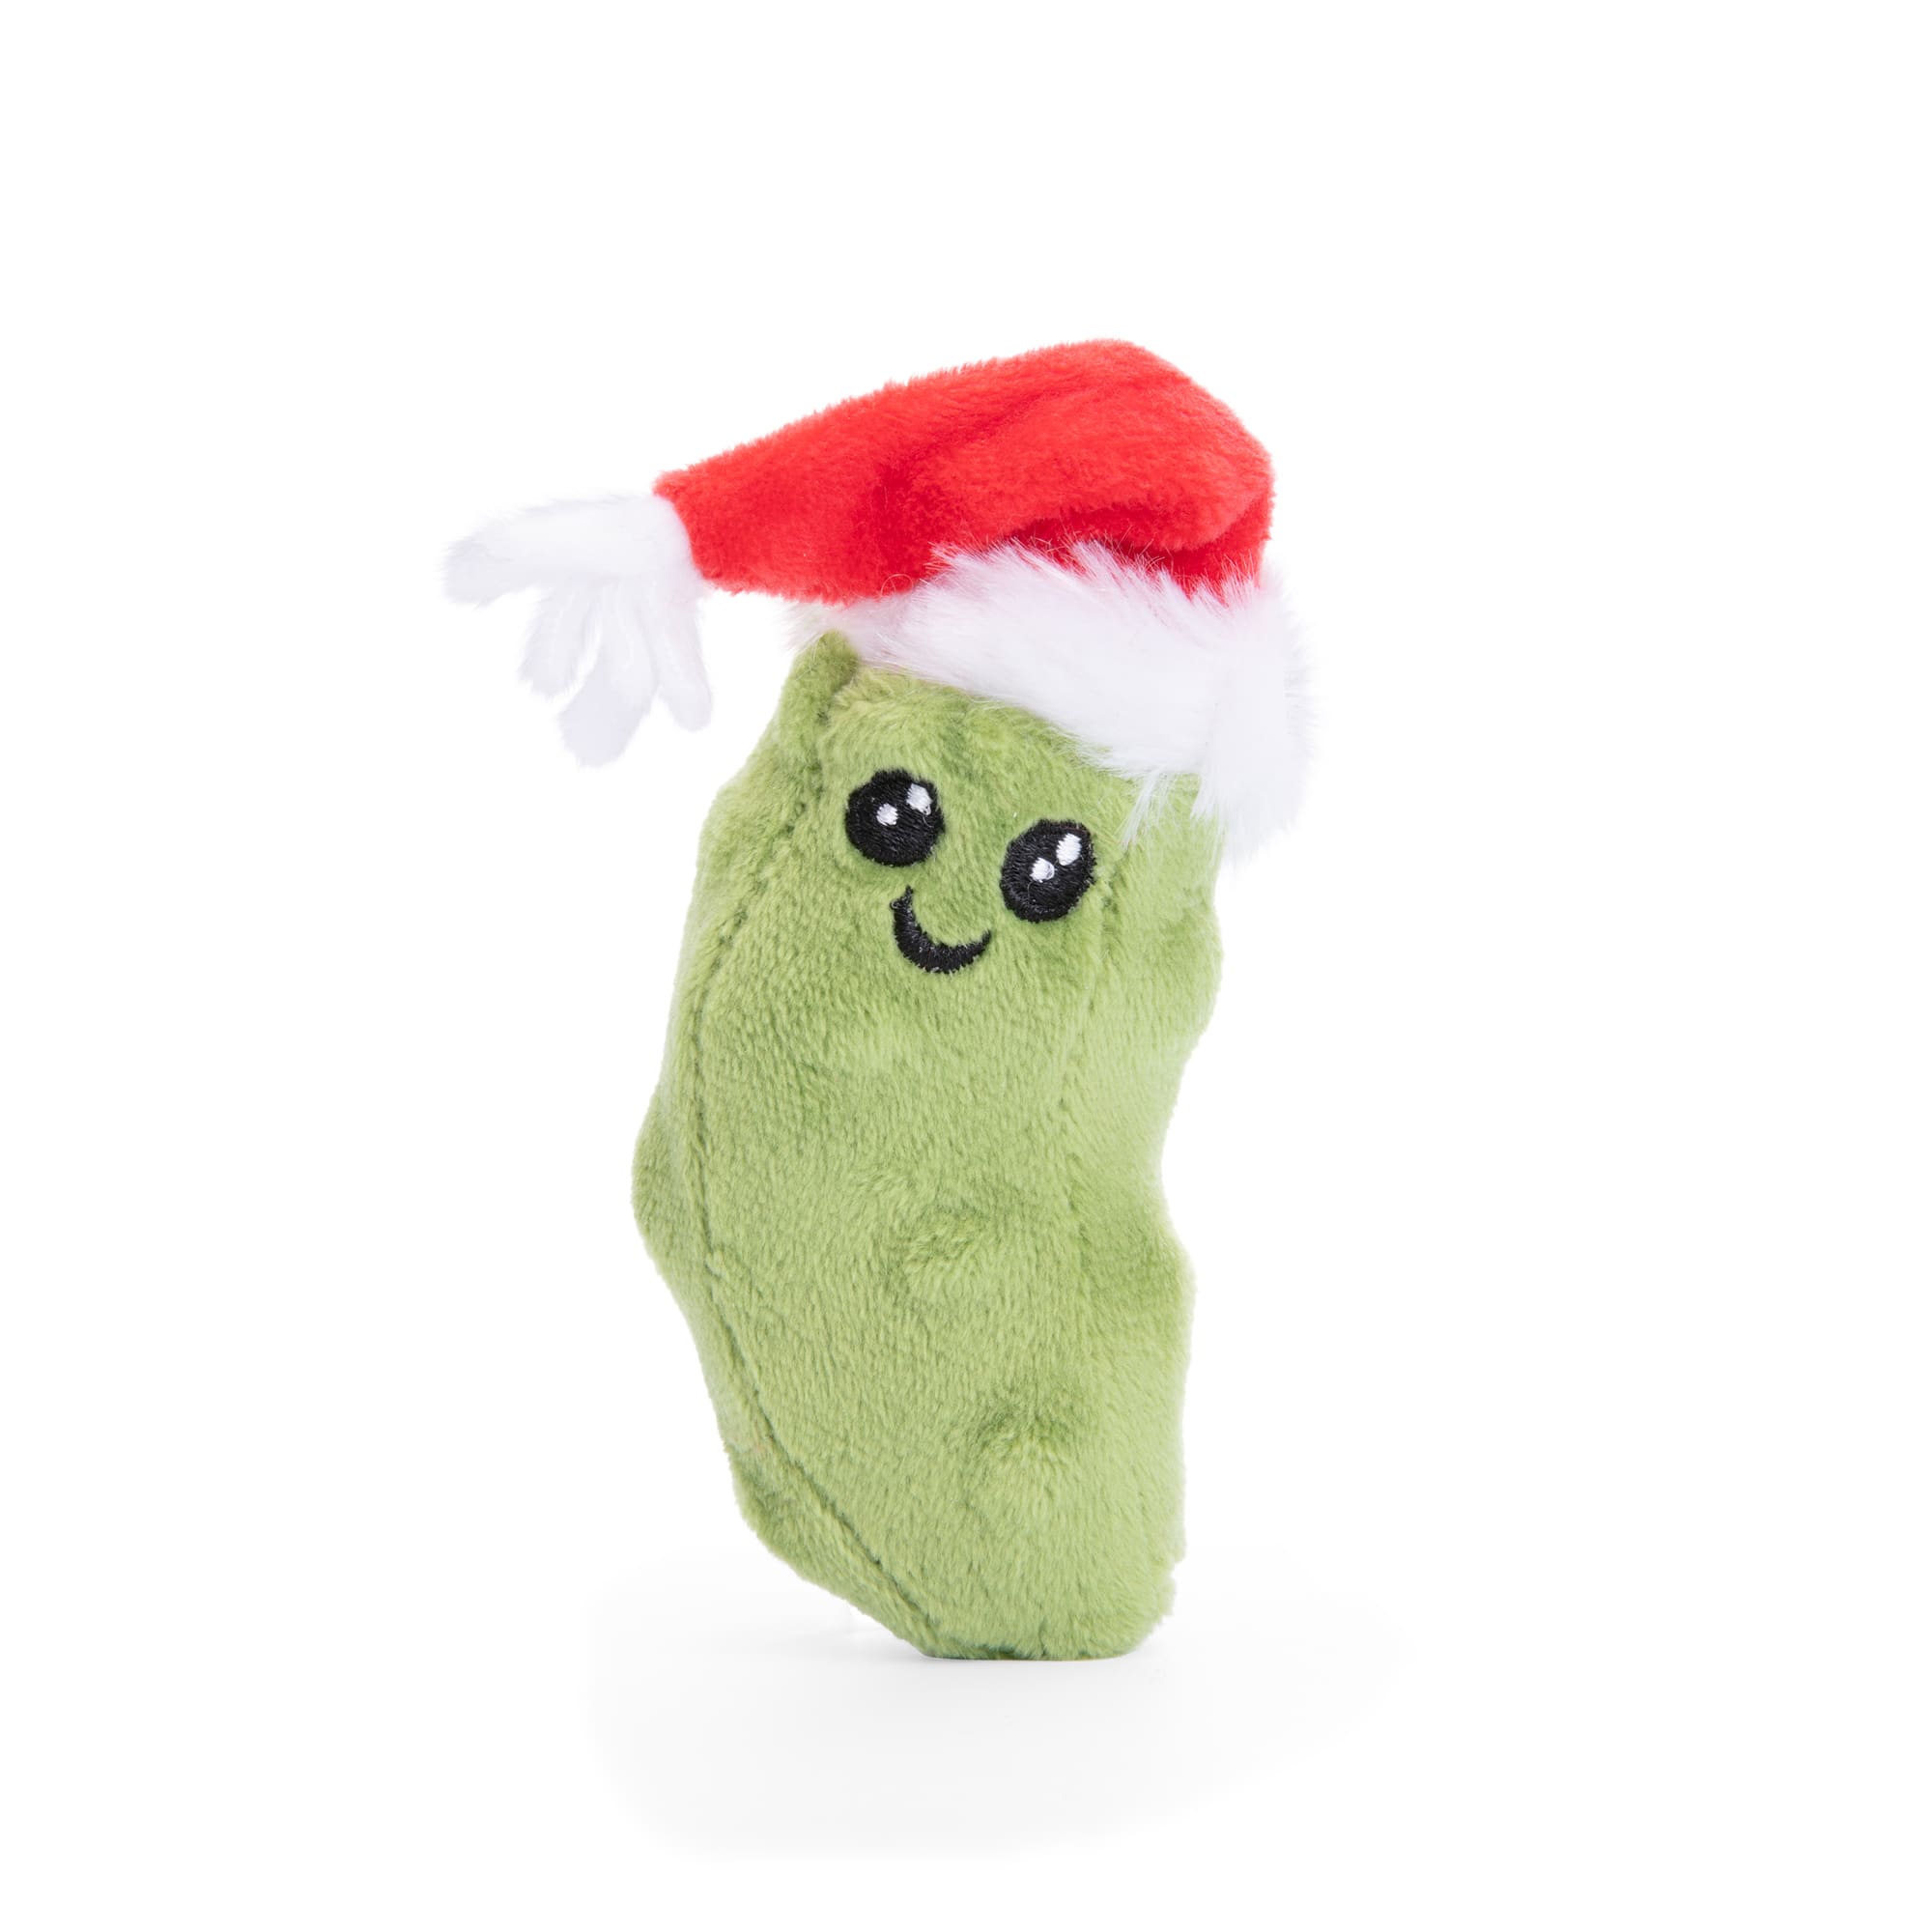 Merry Makings Plush Pickle Dog Toy X